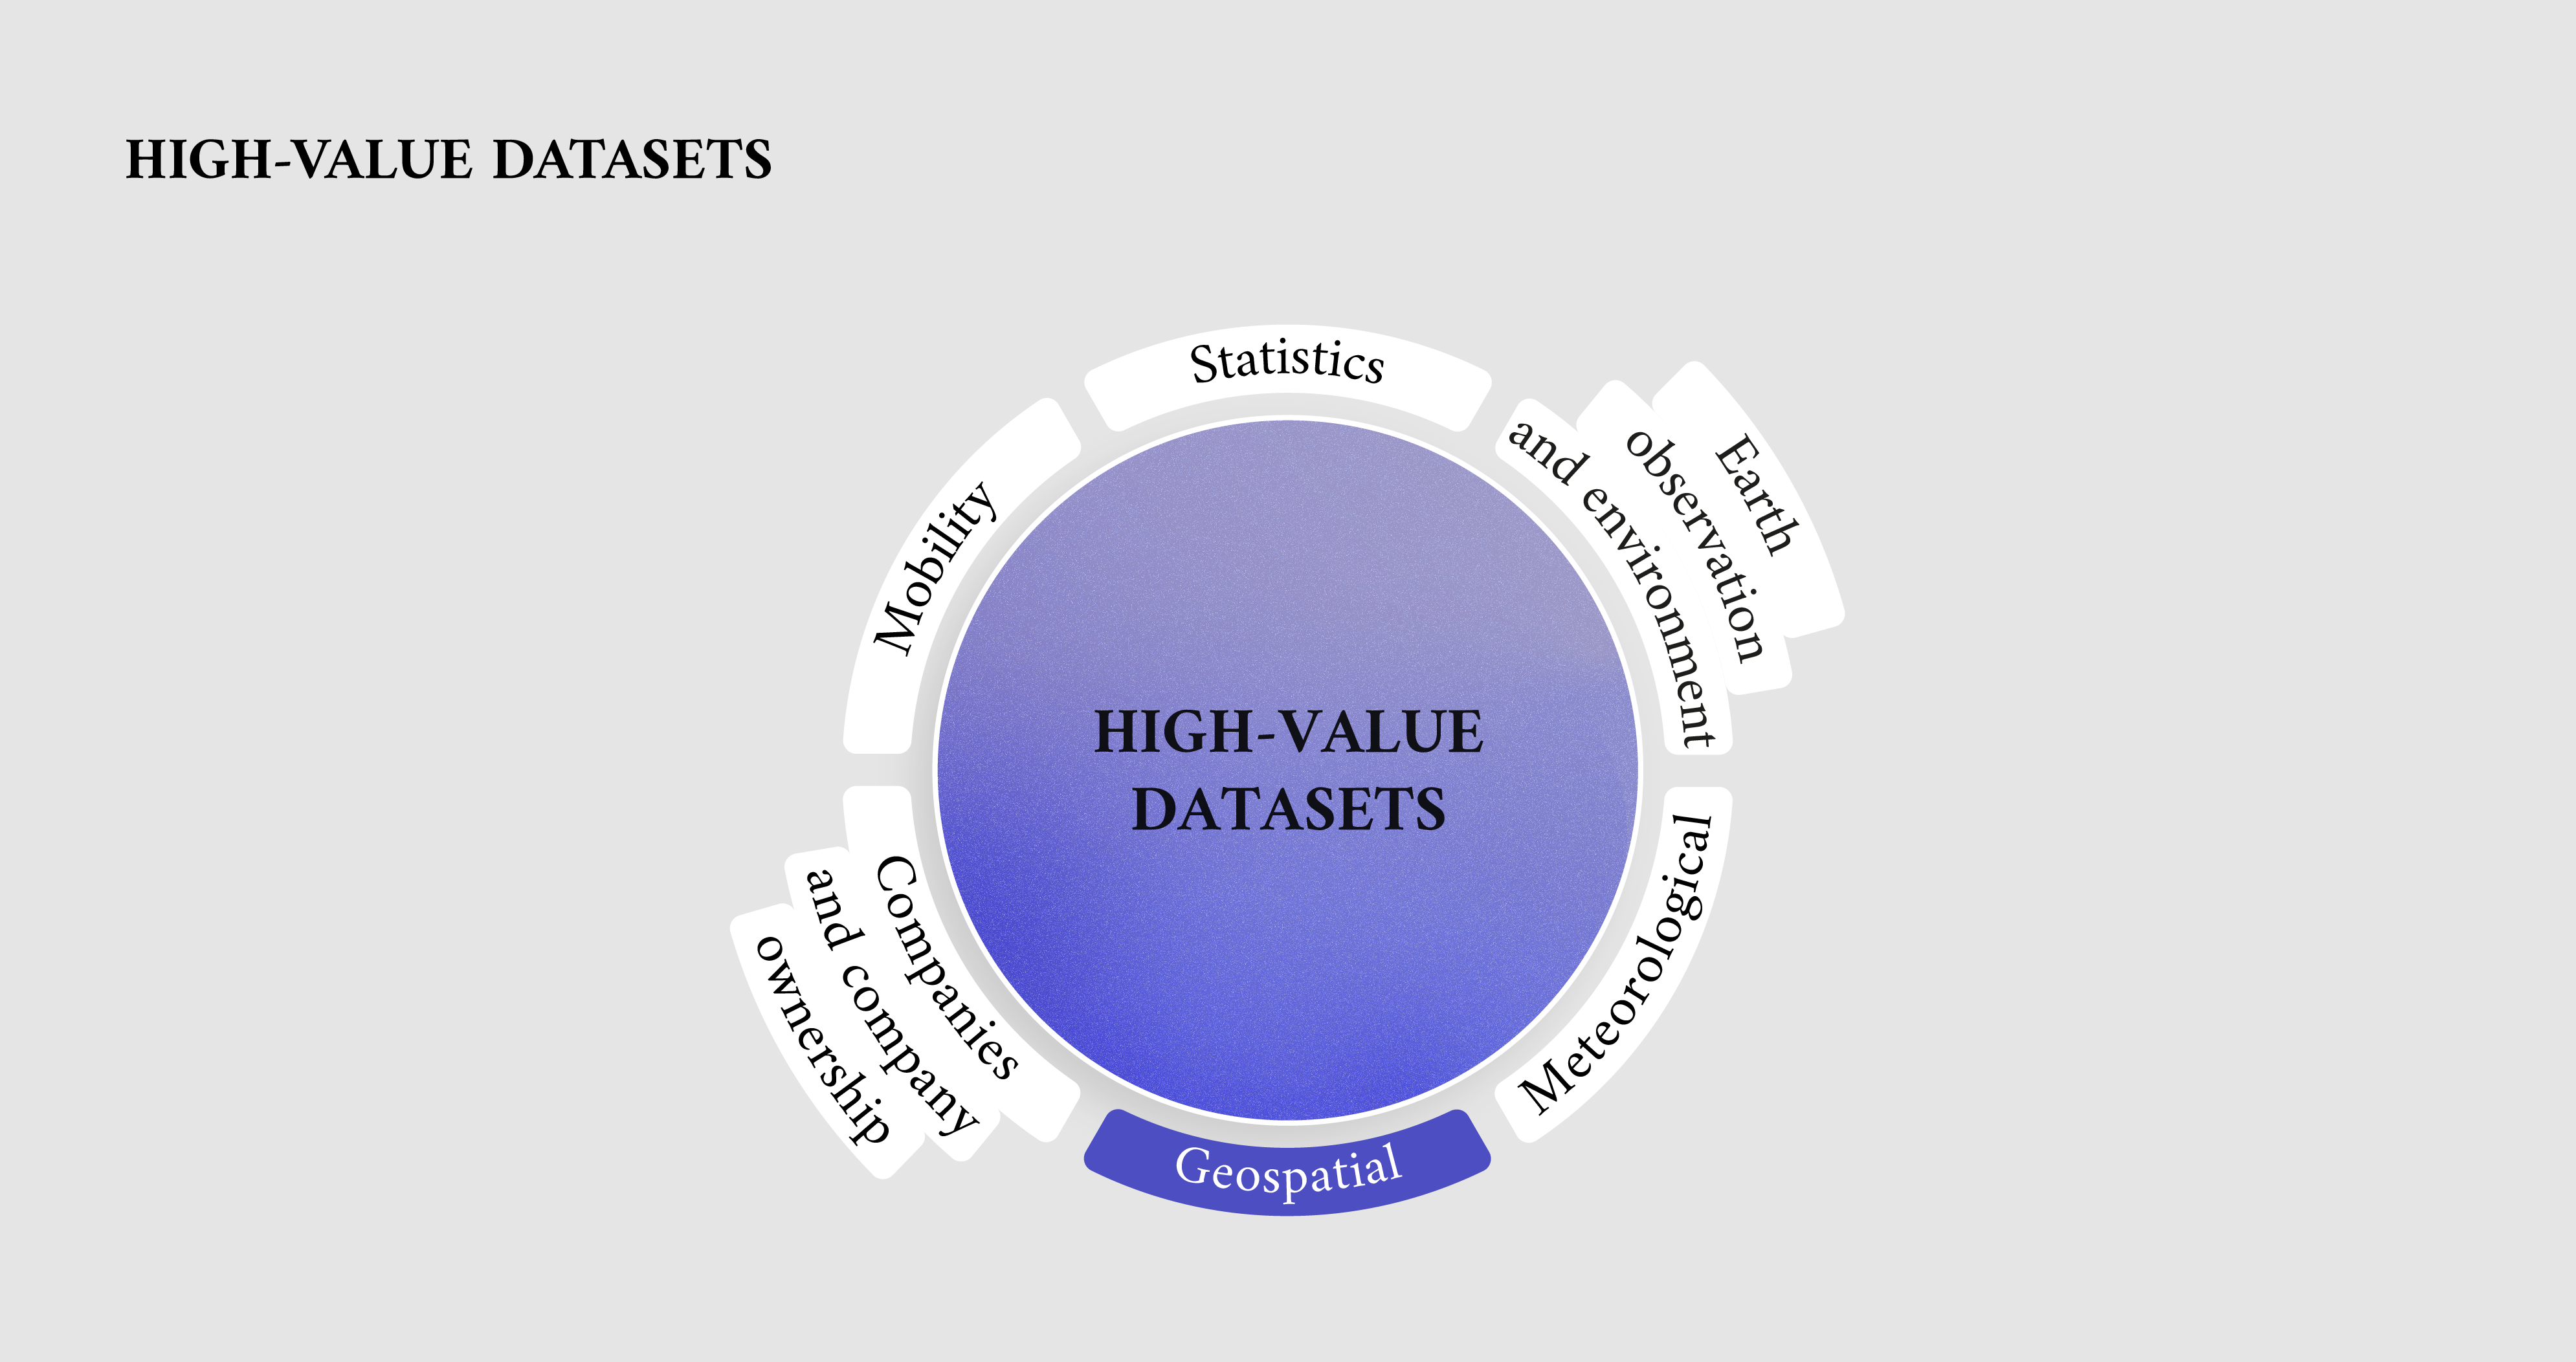 Characteristics of high-value datasets